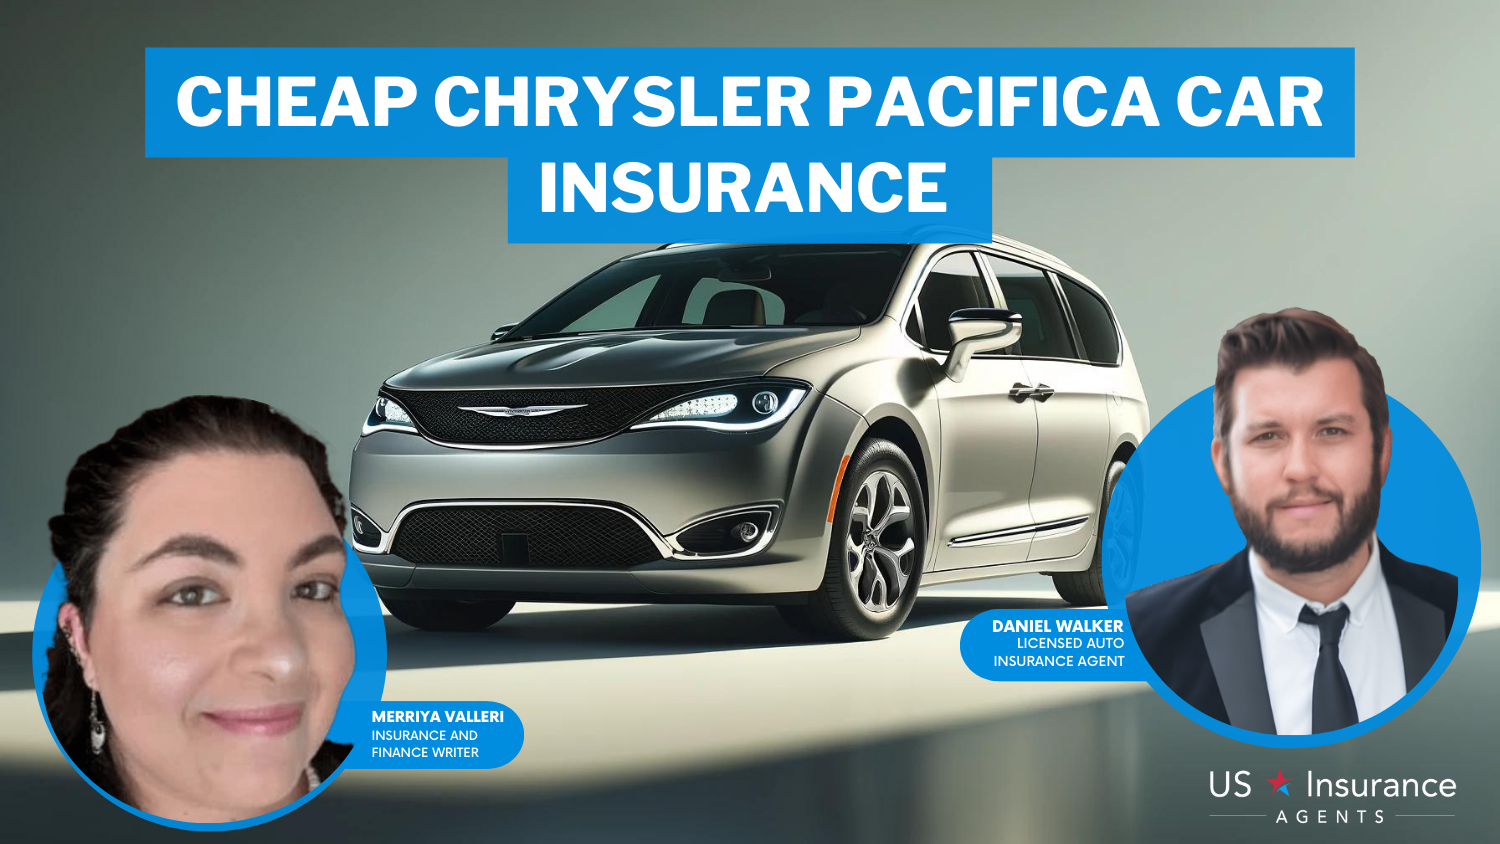 Cheap Chrysler Pacifica Car Insurance: State Farm, USAA, and Safeco 